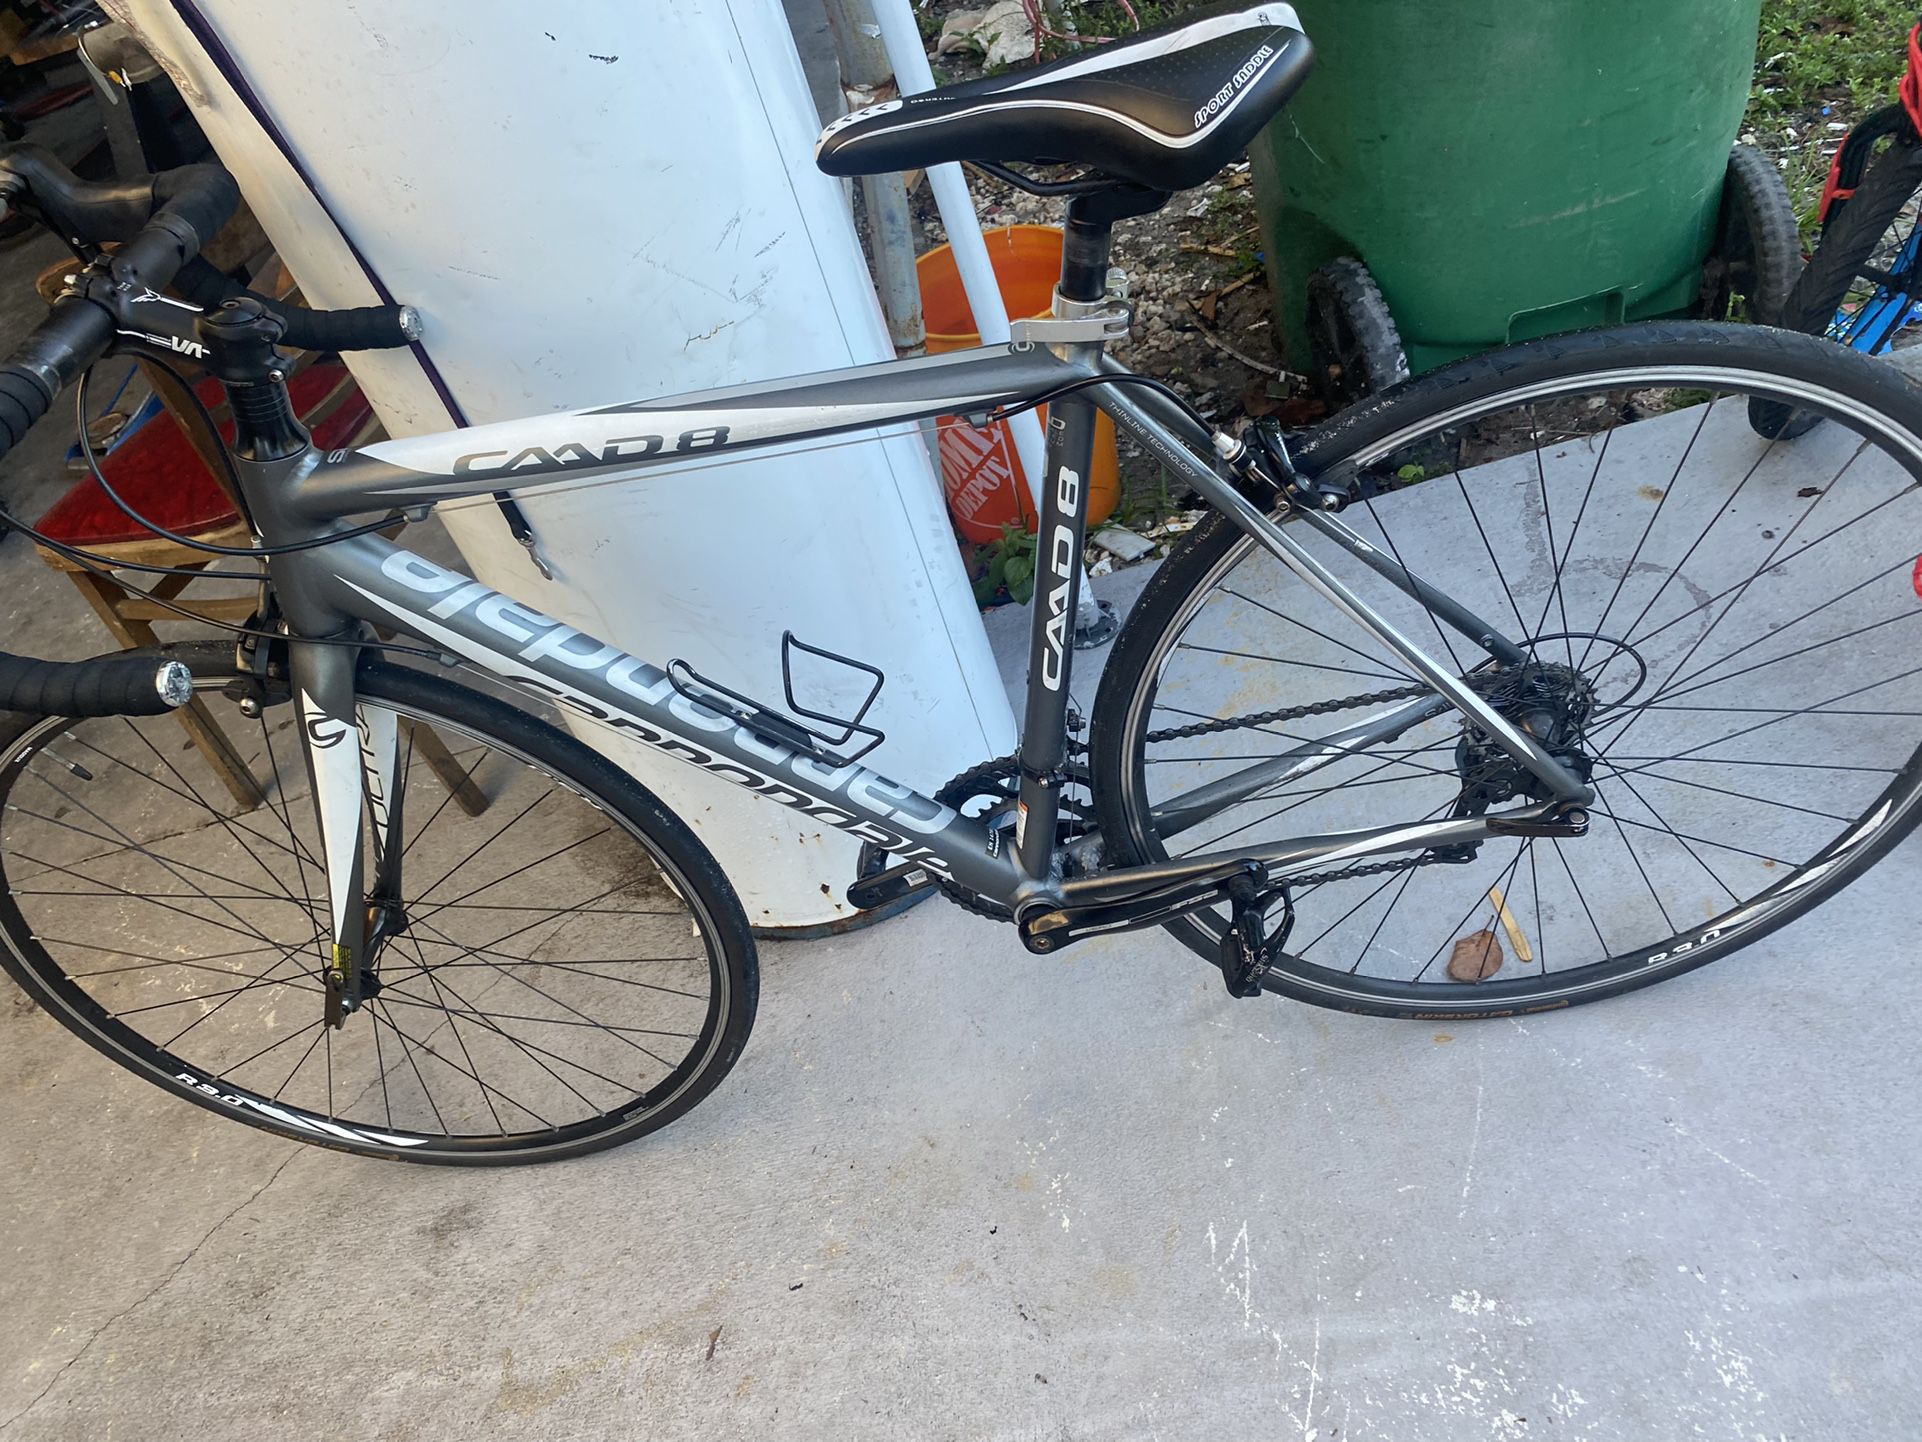 Cannondale 8. 51 Cm. Very Nice Bike 51 Cm 27 Rides Great Very Light And Fast Wheel Size 700 C Aluminio for Sale in FL - OfferUp